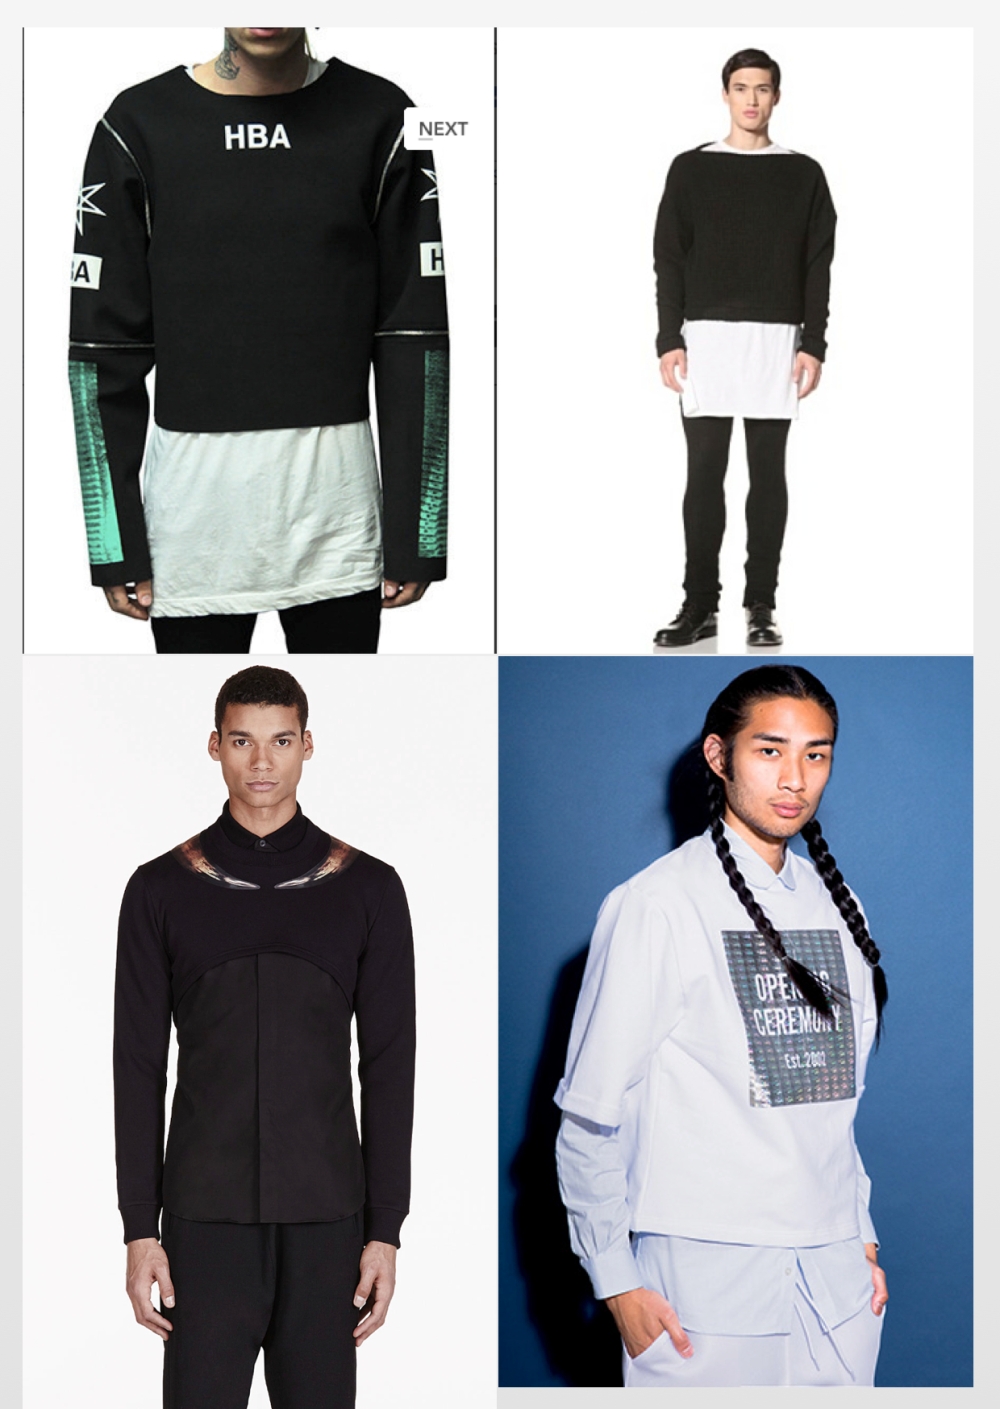 ...and designer produced: 1) Hood by Air "Neopreen" sweater 2) Telfar Quilted crop sweater 3) Givenchy Black Horn print cropped sweater 4) Opening Ceremony Cut-Off logo sweat tee 